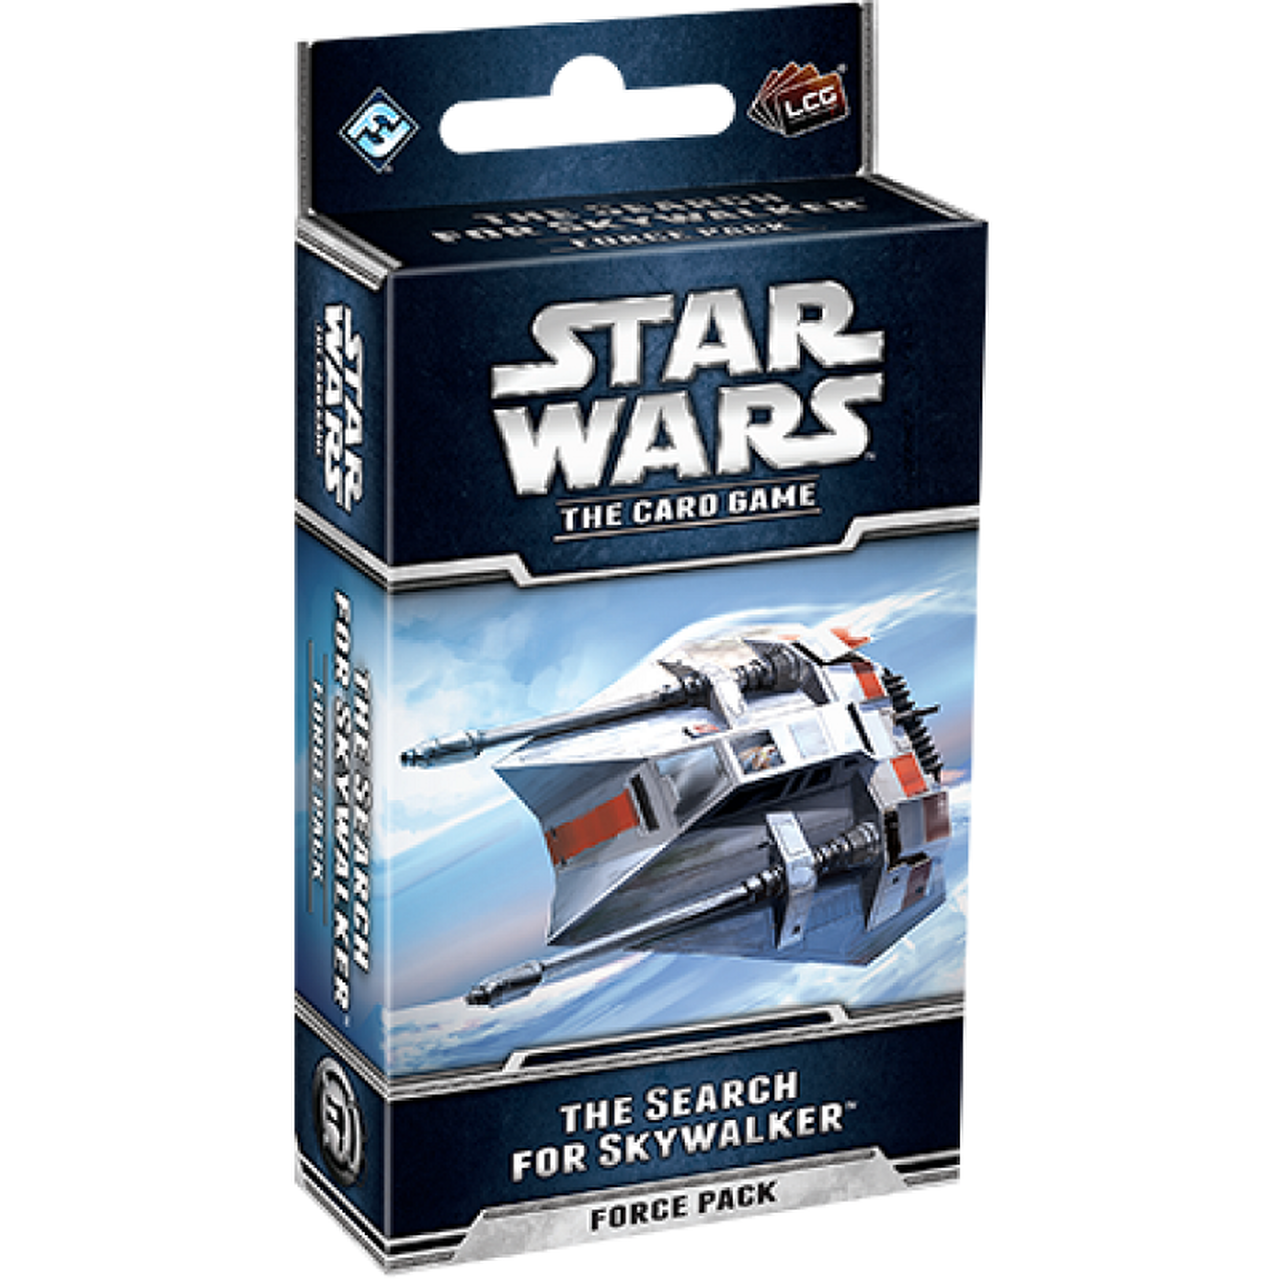 Star Wars LCG: The Search for Skywalker Force Pack | All About Games